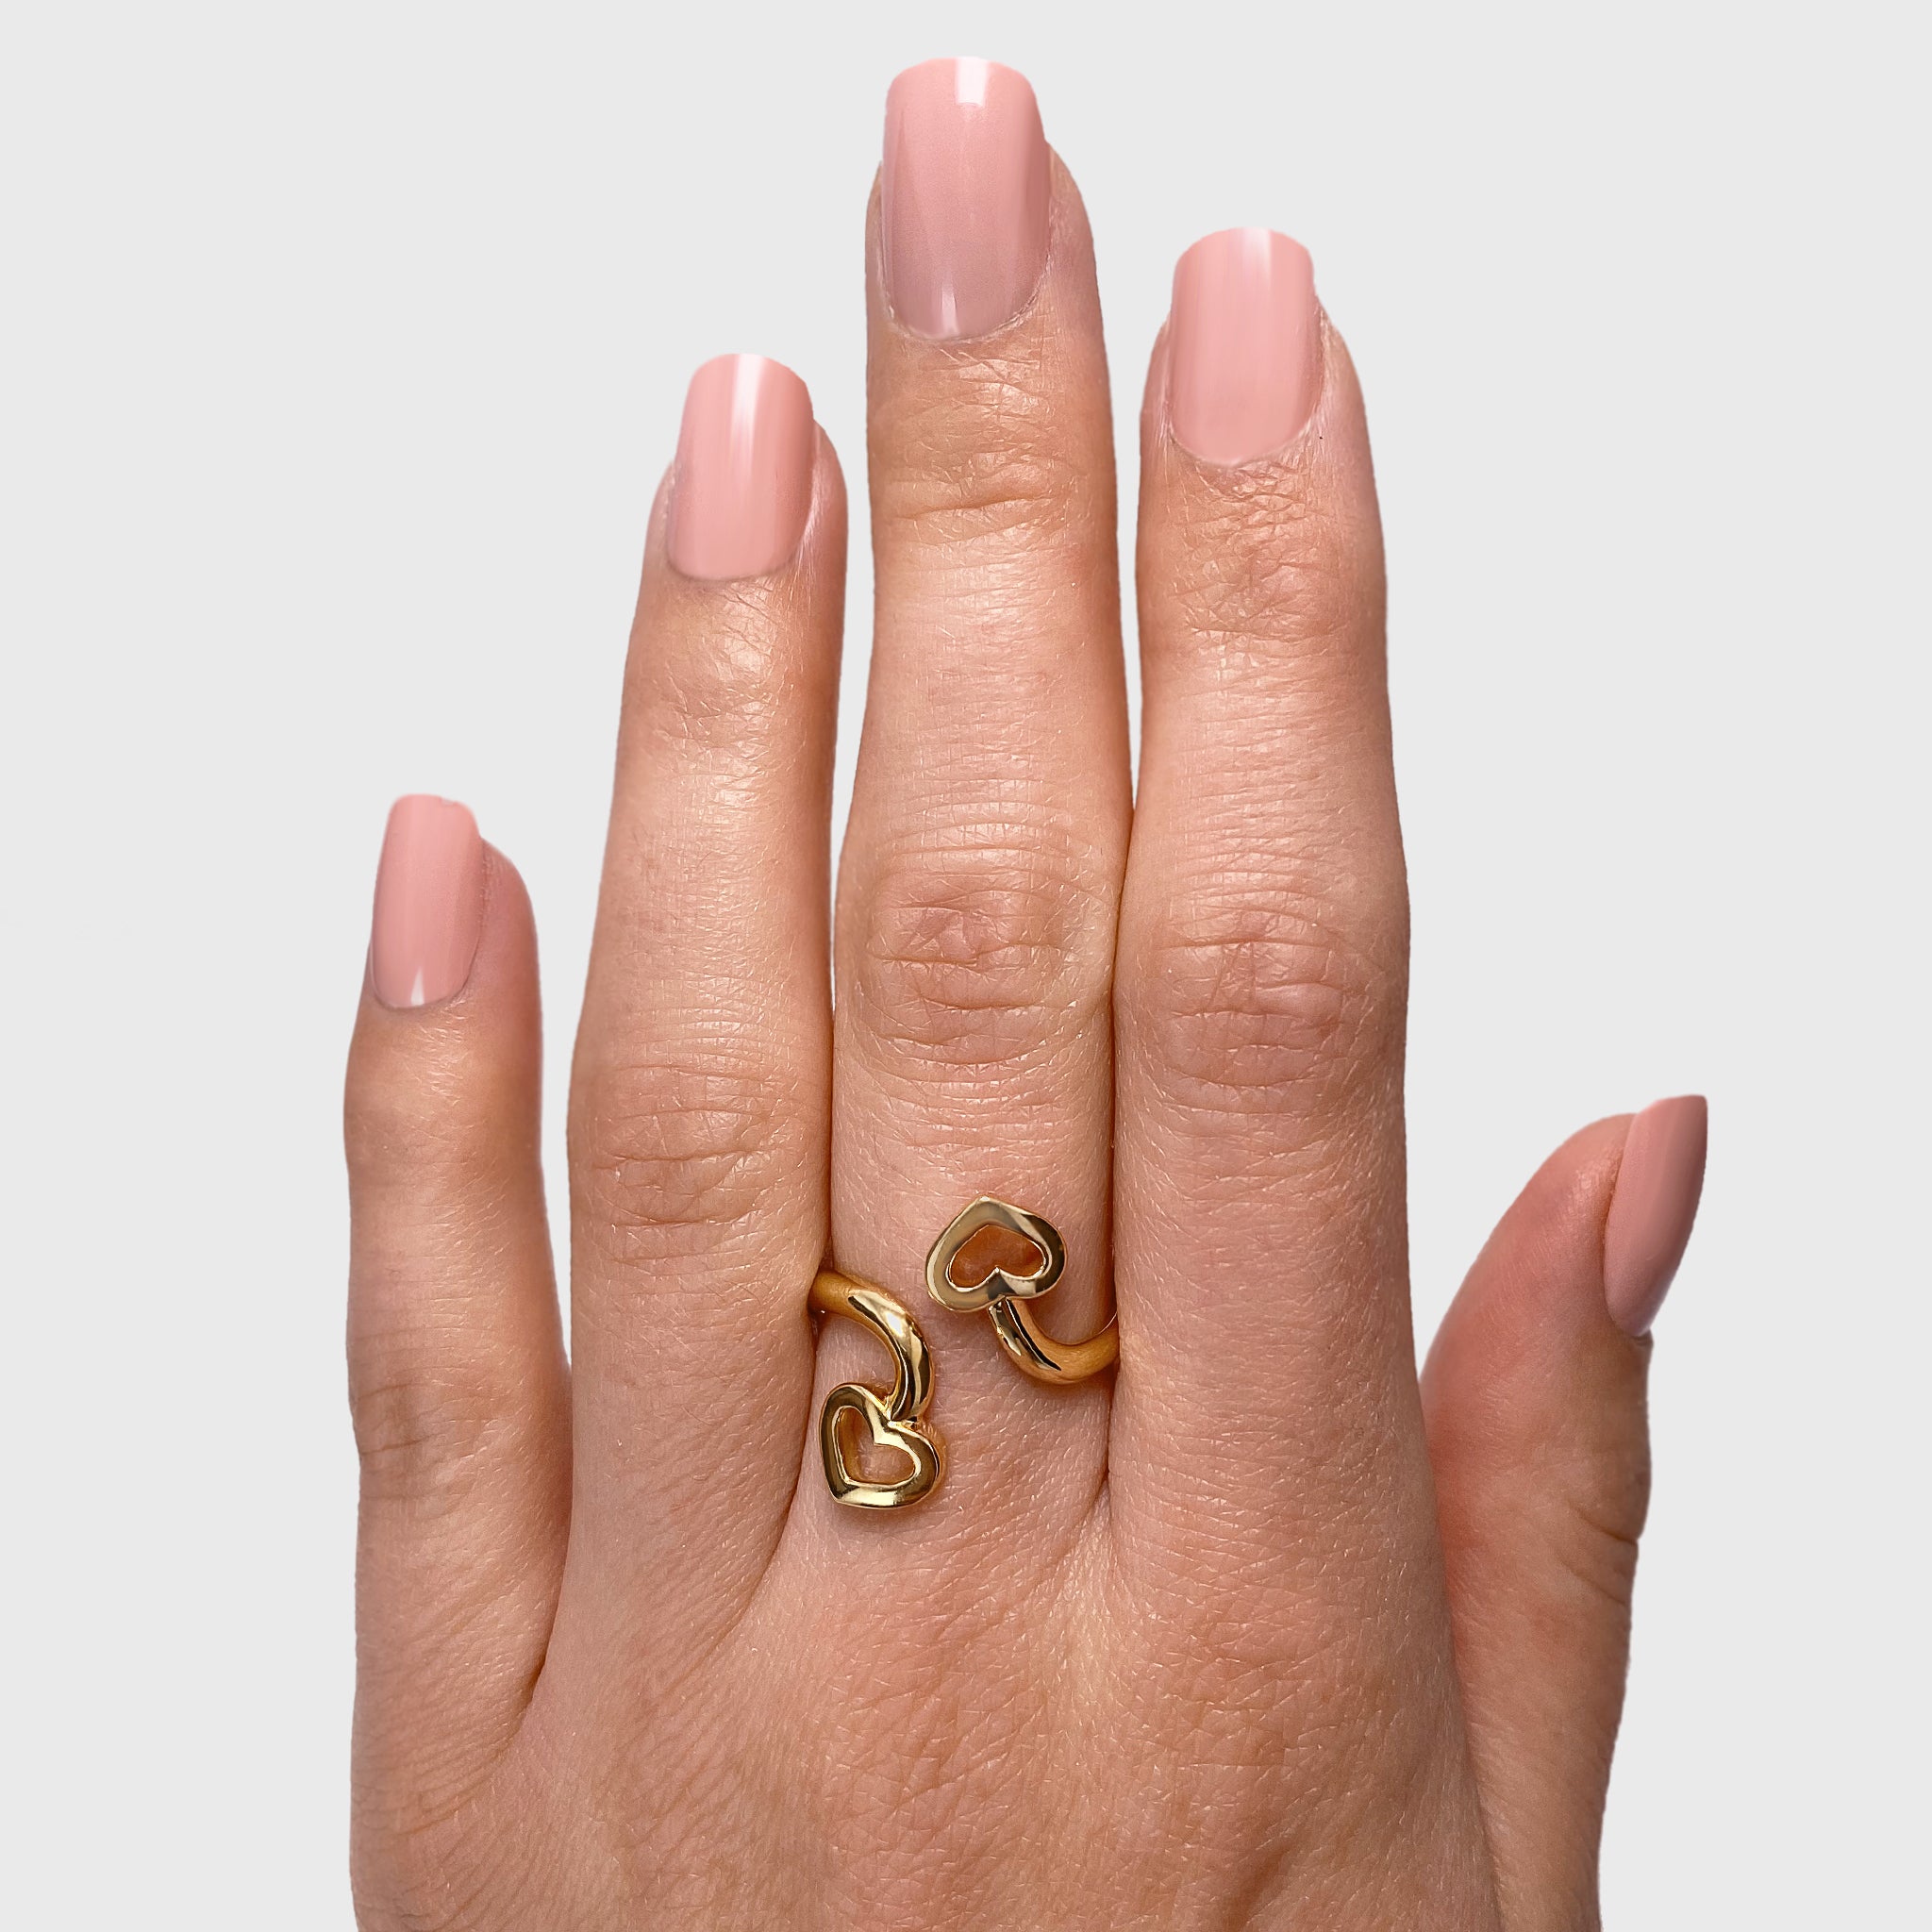 Shimansky - Women Wearing the Two Hearts Twist Ring Crafted in 18K Yellow Gold